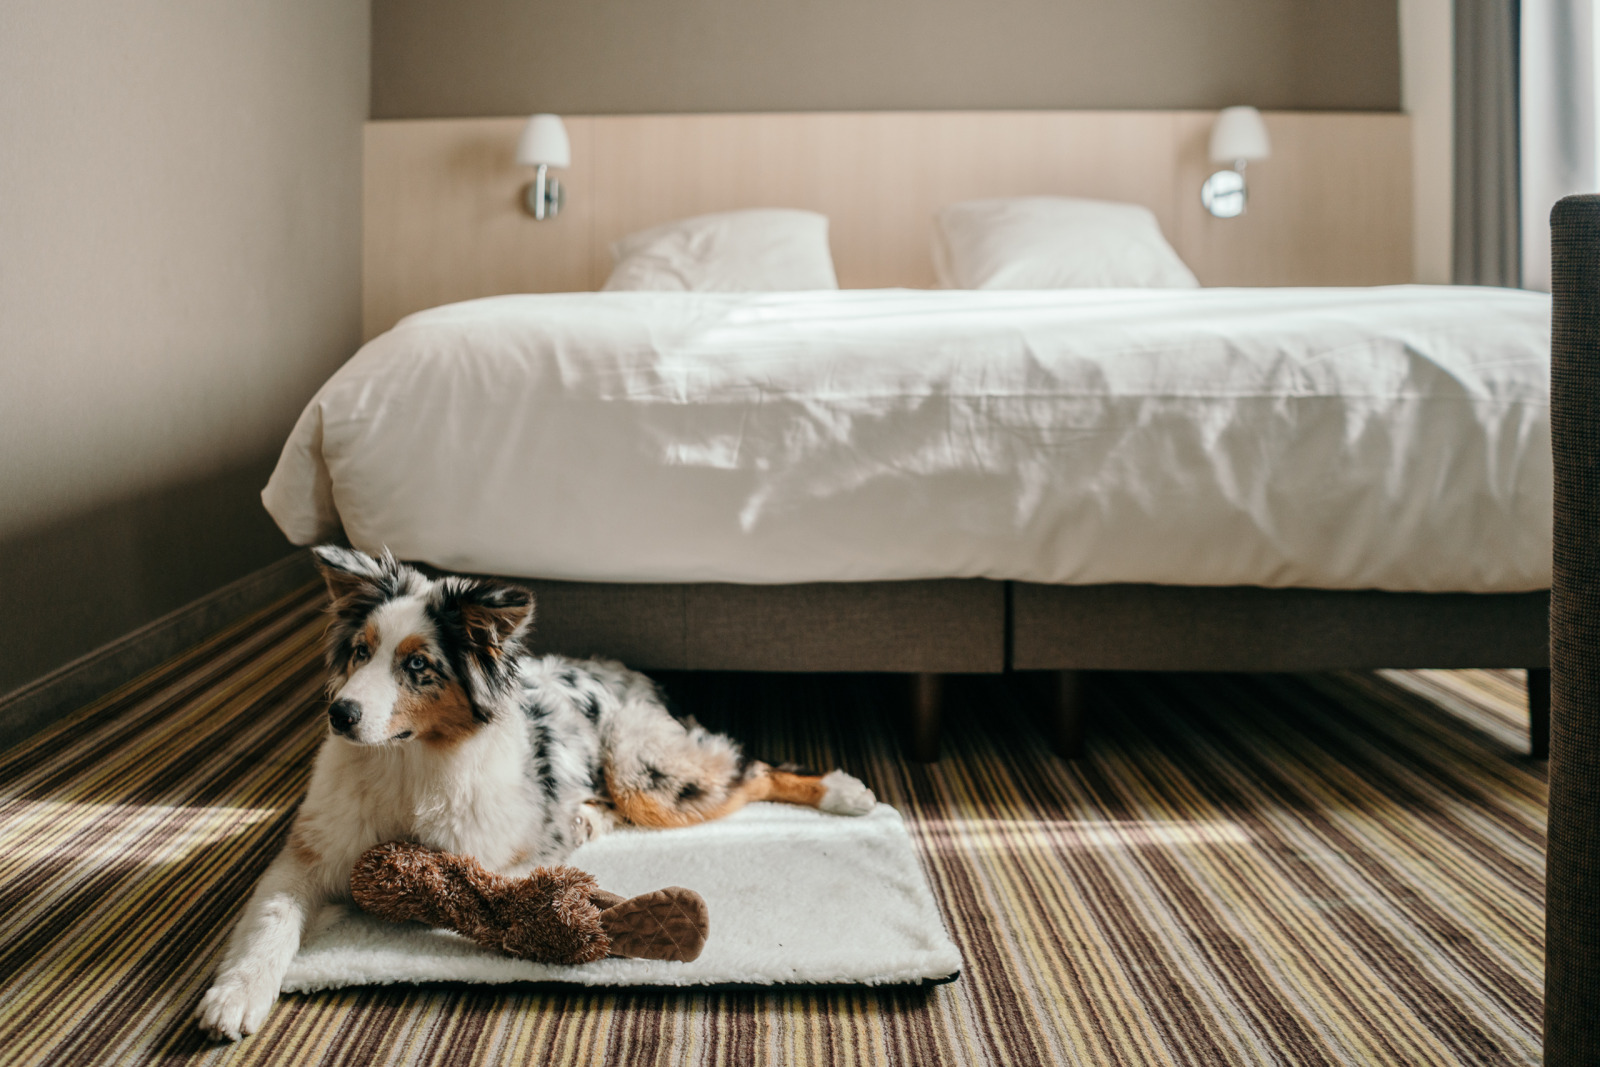 A dog on a carpet in a hotel room